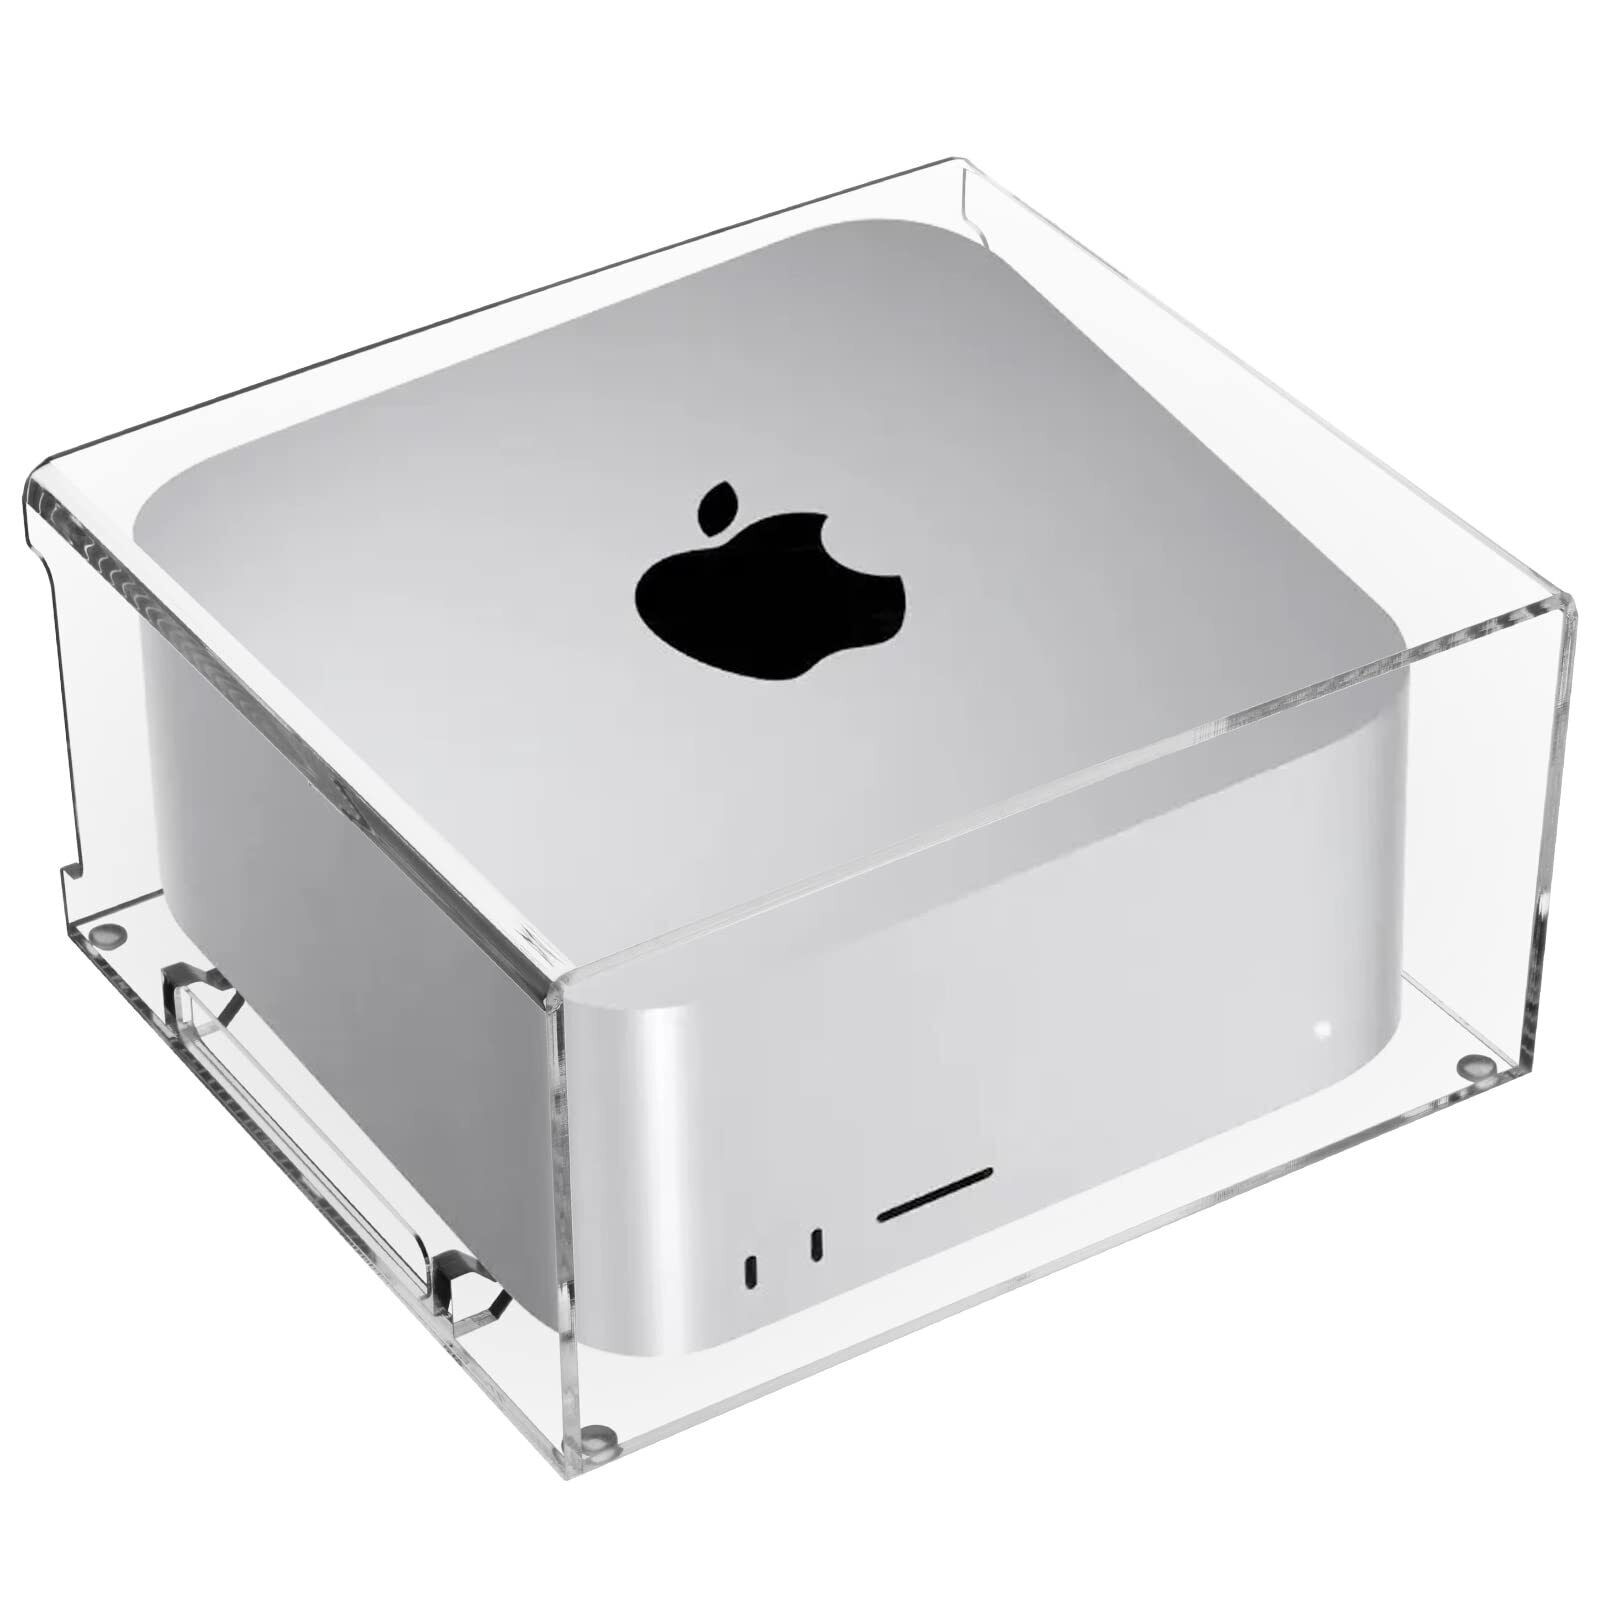 Acrylic Desktop Stand for Apple Mac Studio, Stand Holder Compatible with Mac ...